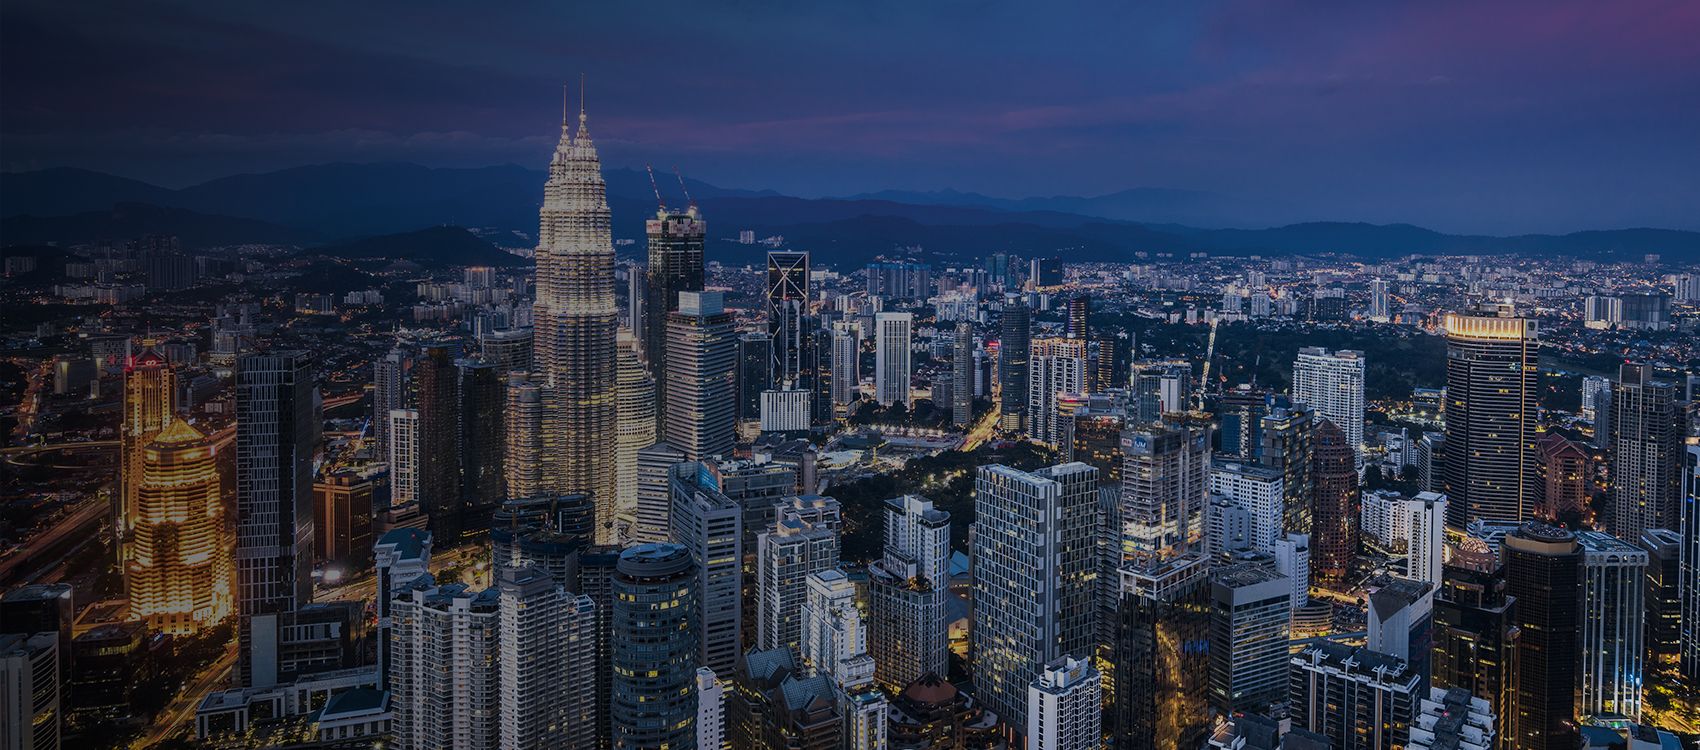 view for miles across capital of kuala lumpur with towering skyscrapers